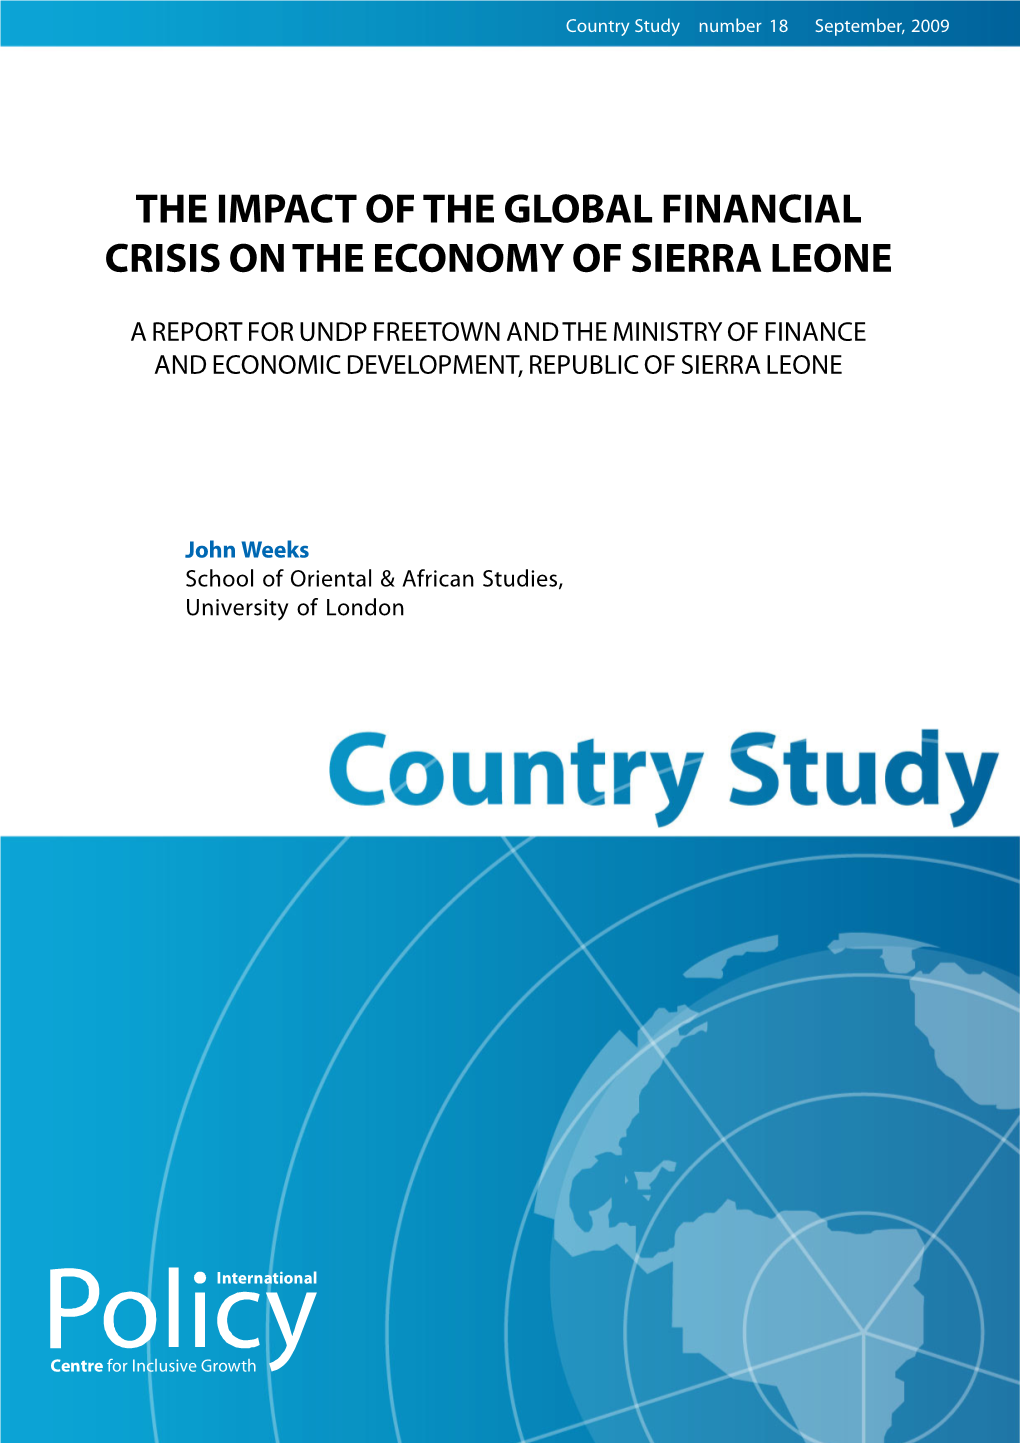 The Impact of the Global Financial Crisis on the Economy of Sierra Leone